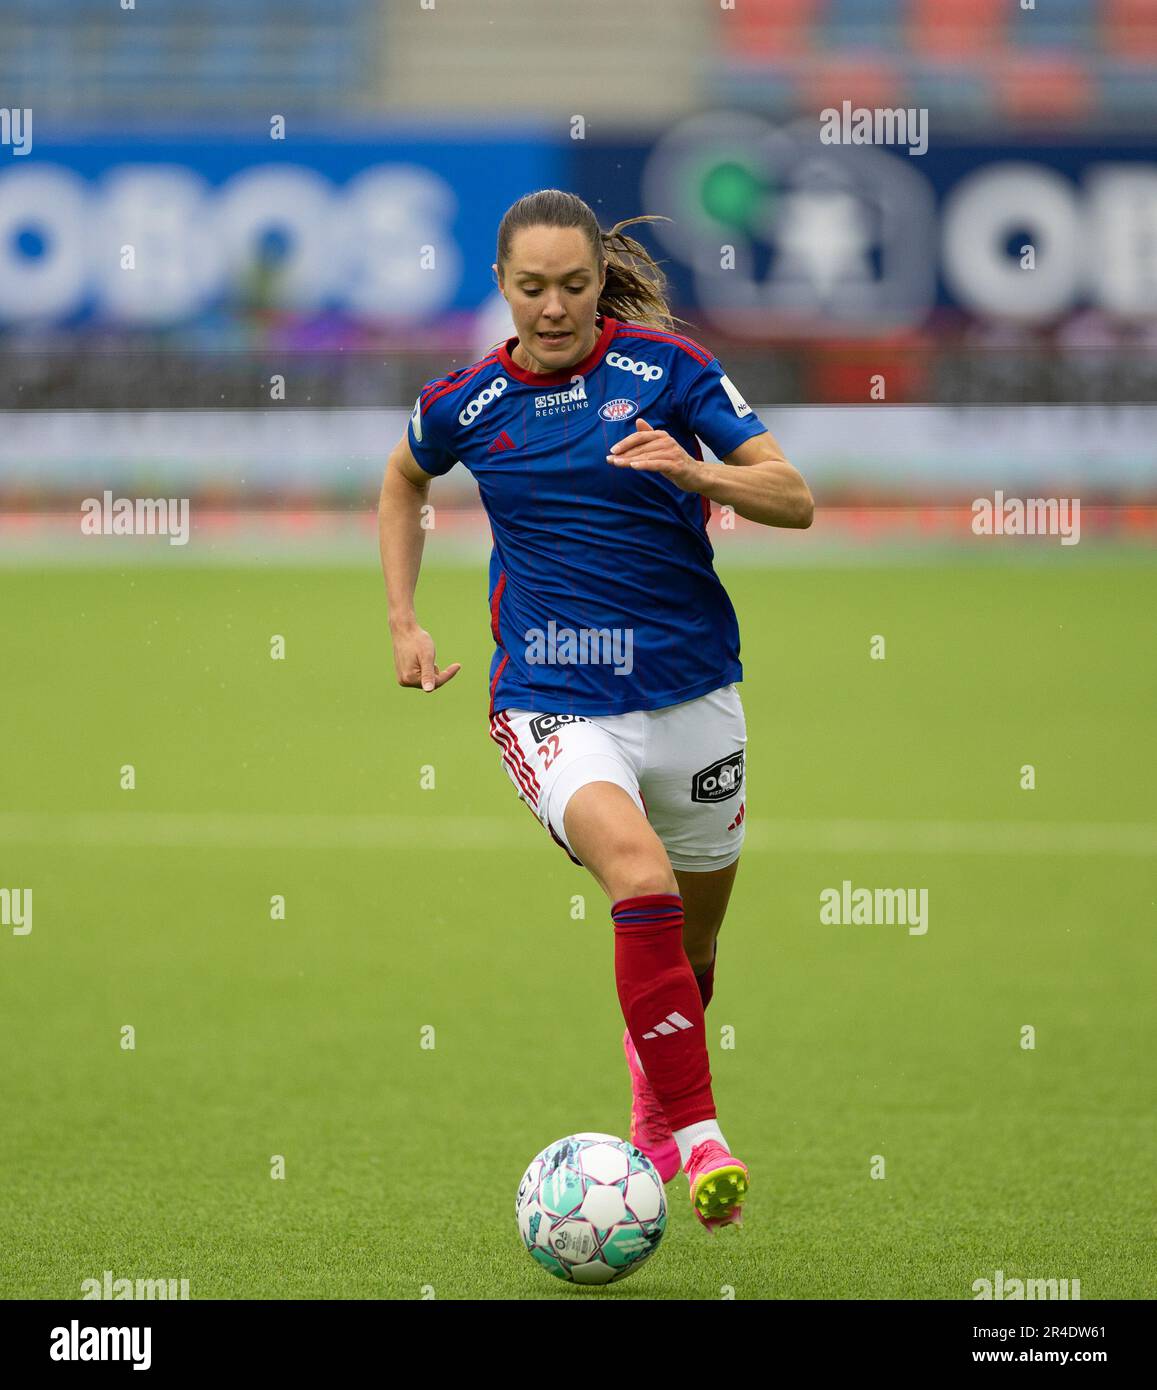 Oslo, Norway. 27th May, 2023. Oslo, Norway, May 27th 2023: Felicia Rogic (22 Valerenga) controls the ball during the Toppserien league game between Valerenga and Rosenborg at Intility Arena in Oslo, Norway (Ane Frosaker/SPP) Credit: SPP Sport Press Photo. /Alamy Live News Stock Photo